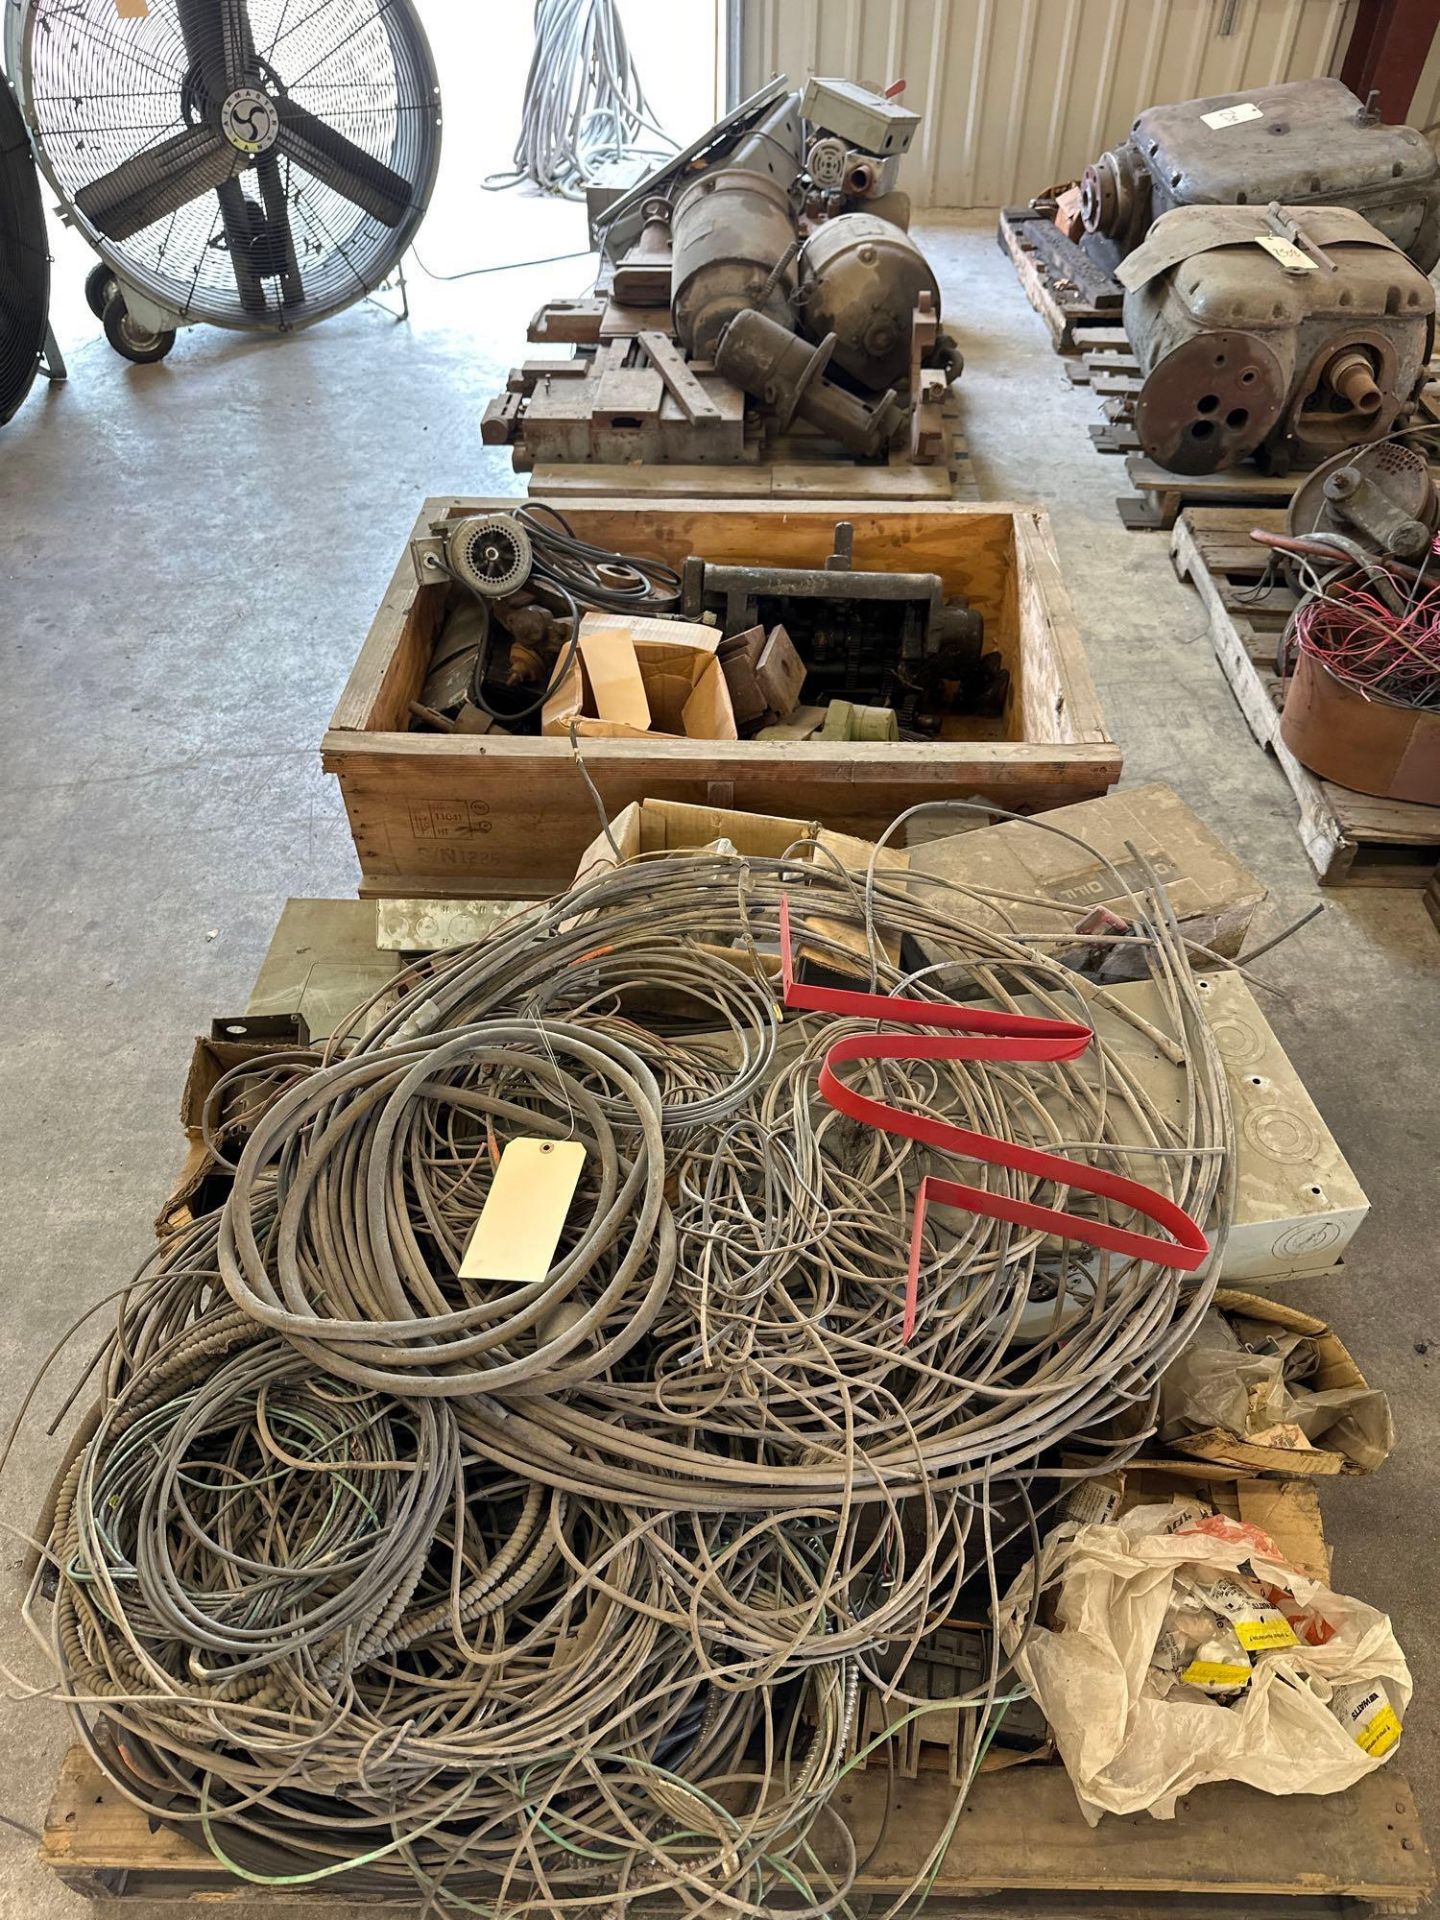 Lot of 14 Pallets of Axelson Parts: Motors, Gear Boxes, Steady Rests, Tail Stocks, Electrical Cabine - Image 2 of 31